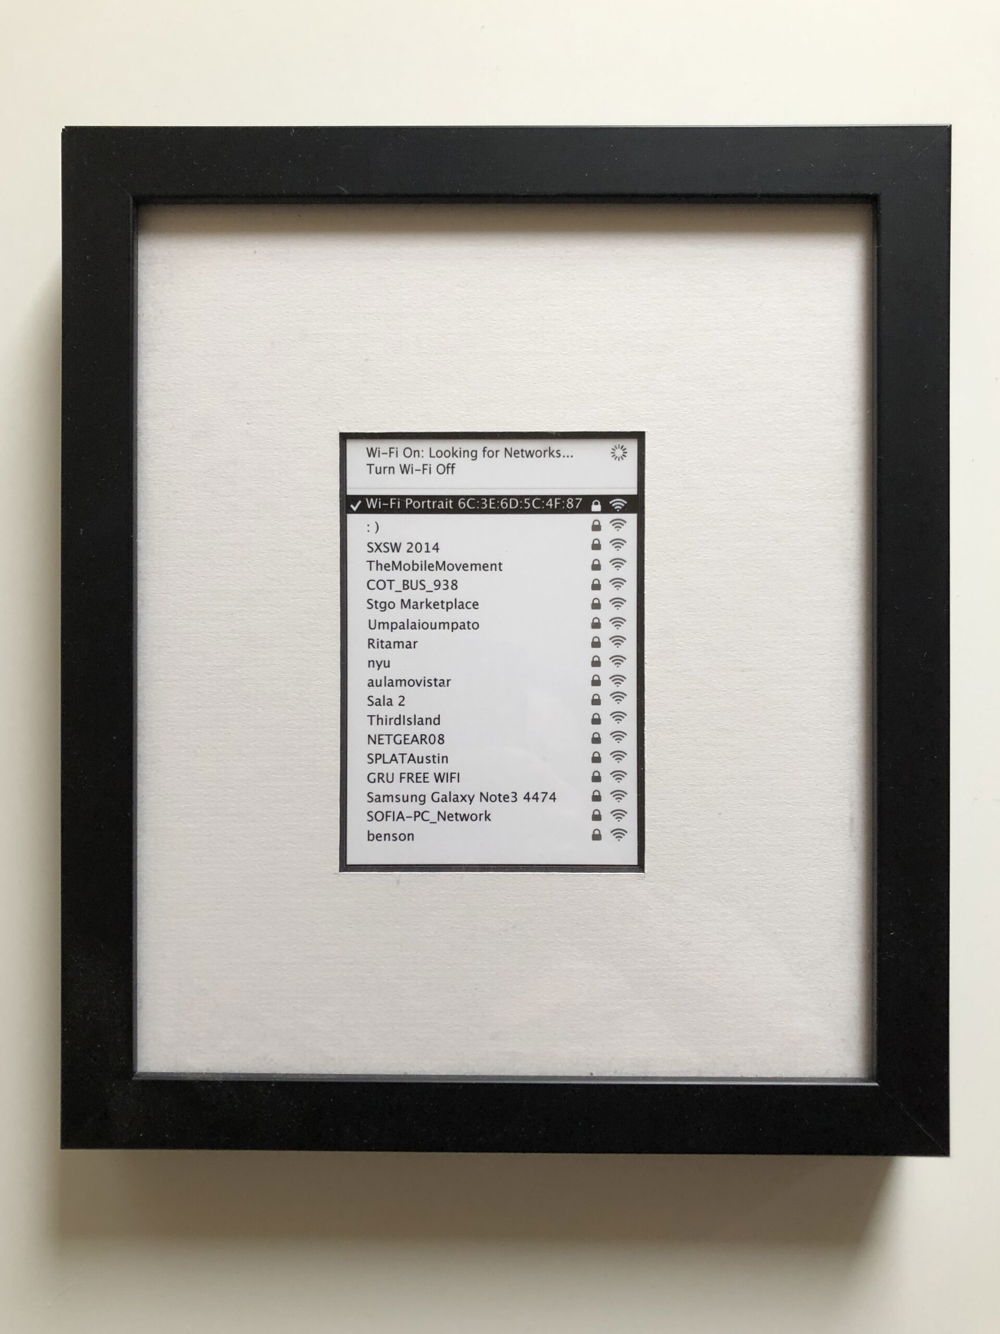 <em>From The Dark</em>, 2015. Framed print; collection of Wi-Fi networks stored in the memory of a smart phone captured as the phone attempted to connect to Wi-Fi in a public space. New York City, NY.